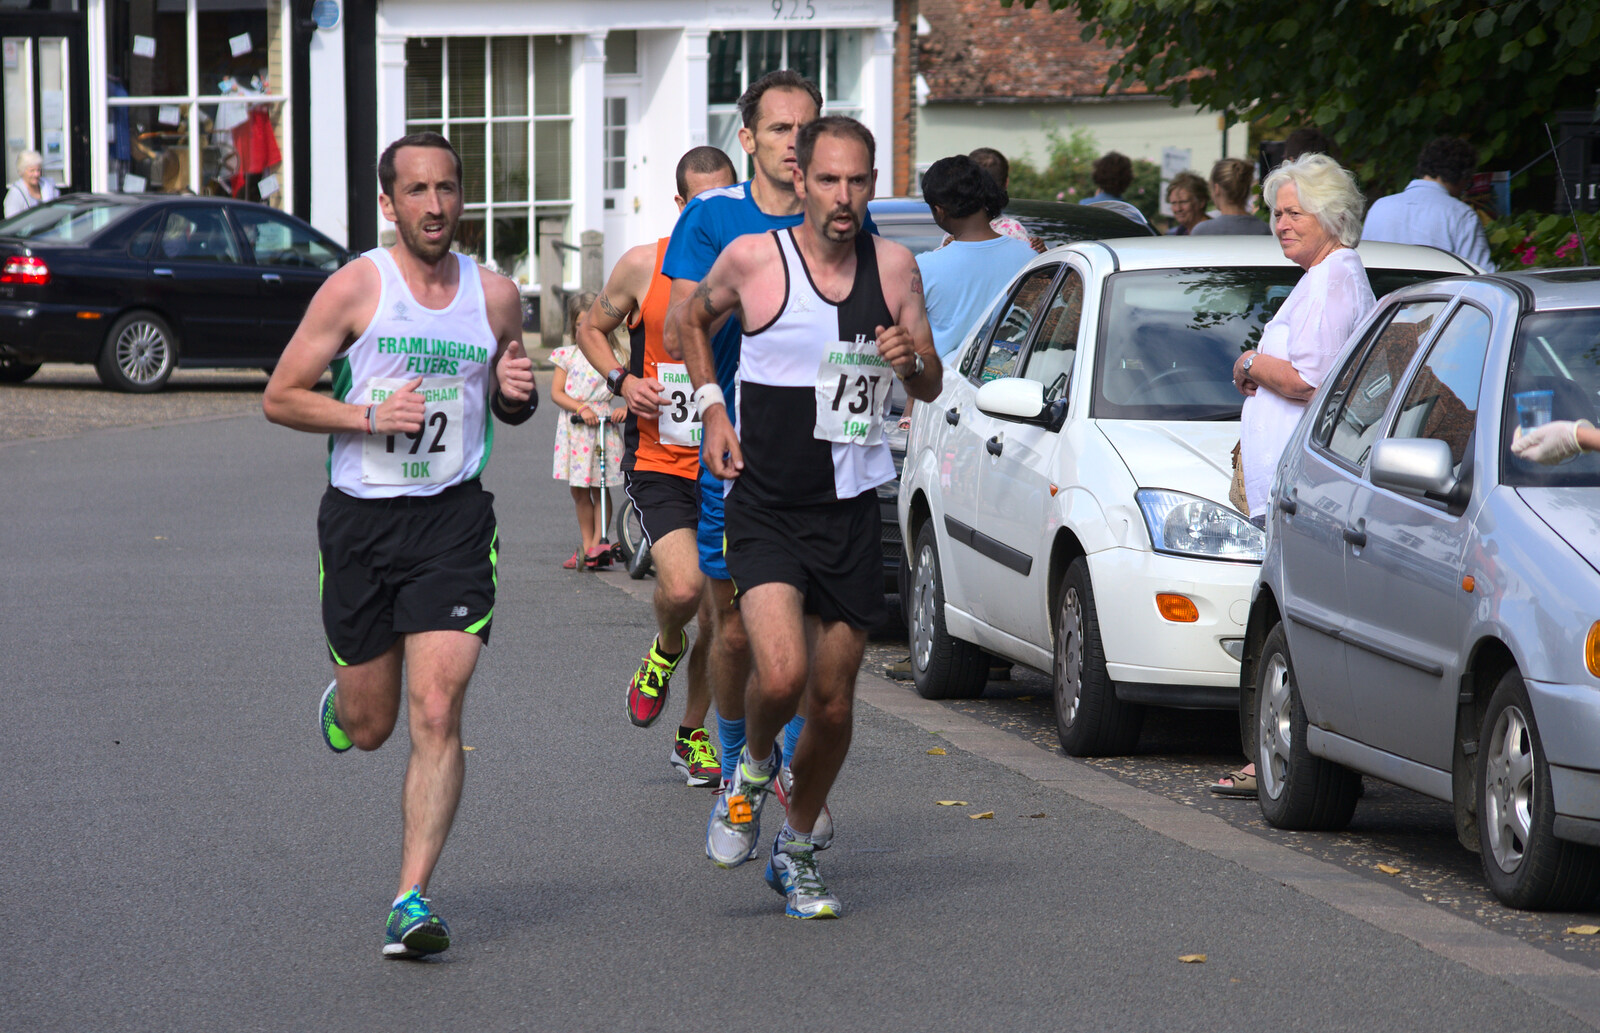 The 10k runners come round for the second time from The Framlingham 10k Run, Suffolk - 31st August 2014